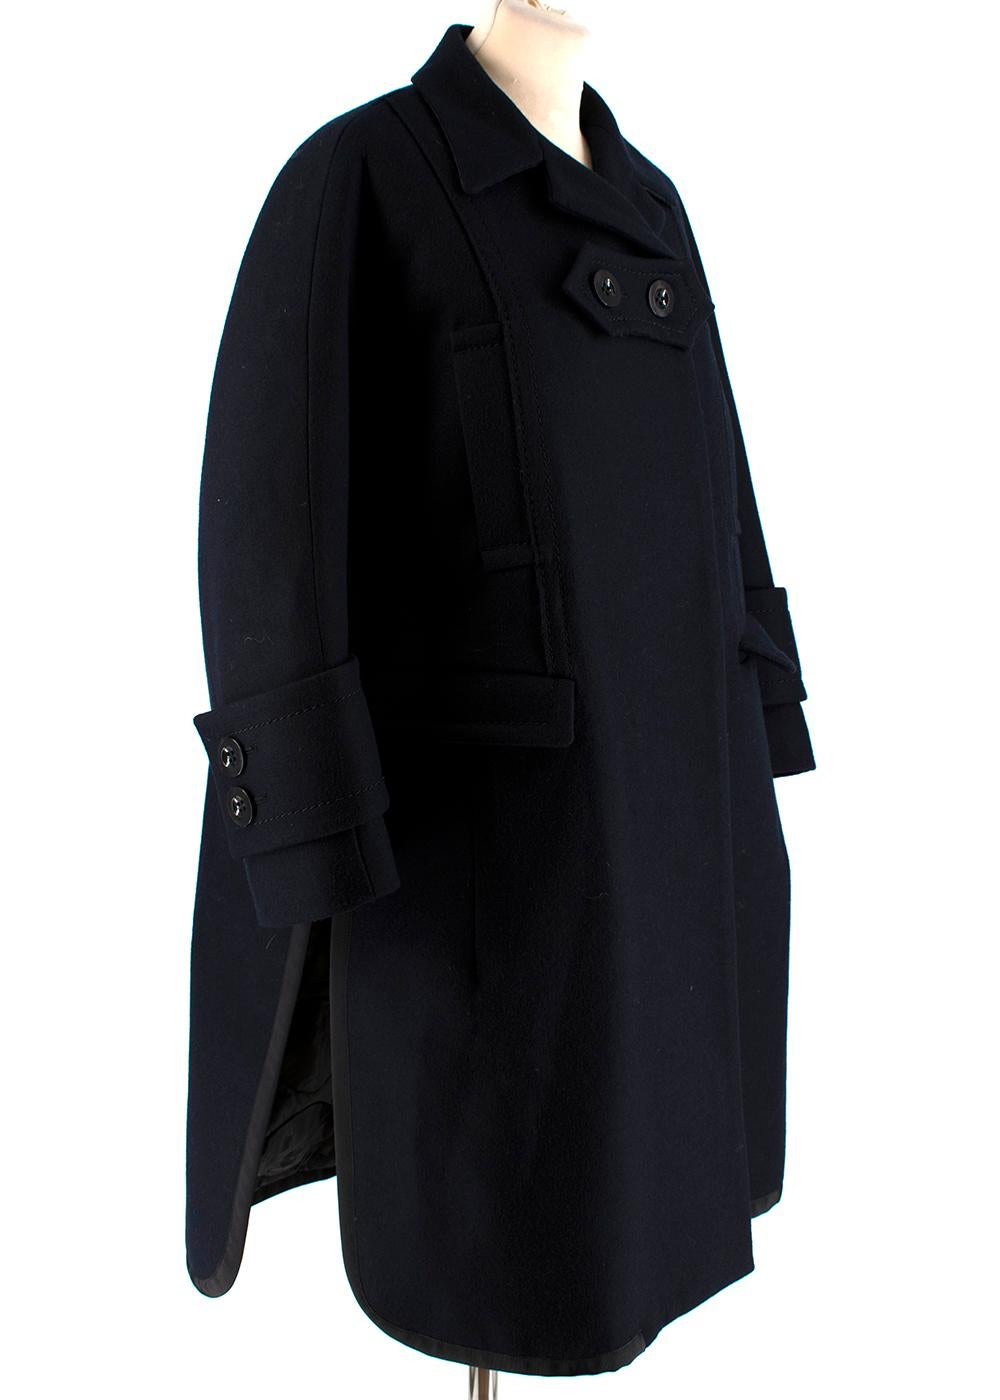 Sacai Navy Wool Double Vented Longline Coat

- Heavy wool longline coat 
- Concealed single breasted button fastening 
- Notched collar 
- Front flap pockets 
- Buttoned cuffs
- Double side vents with adjustable ribbon fastening 

Materials: 
Main -